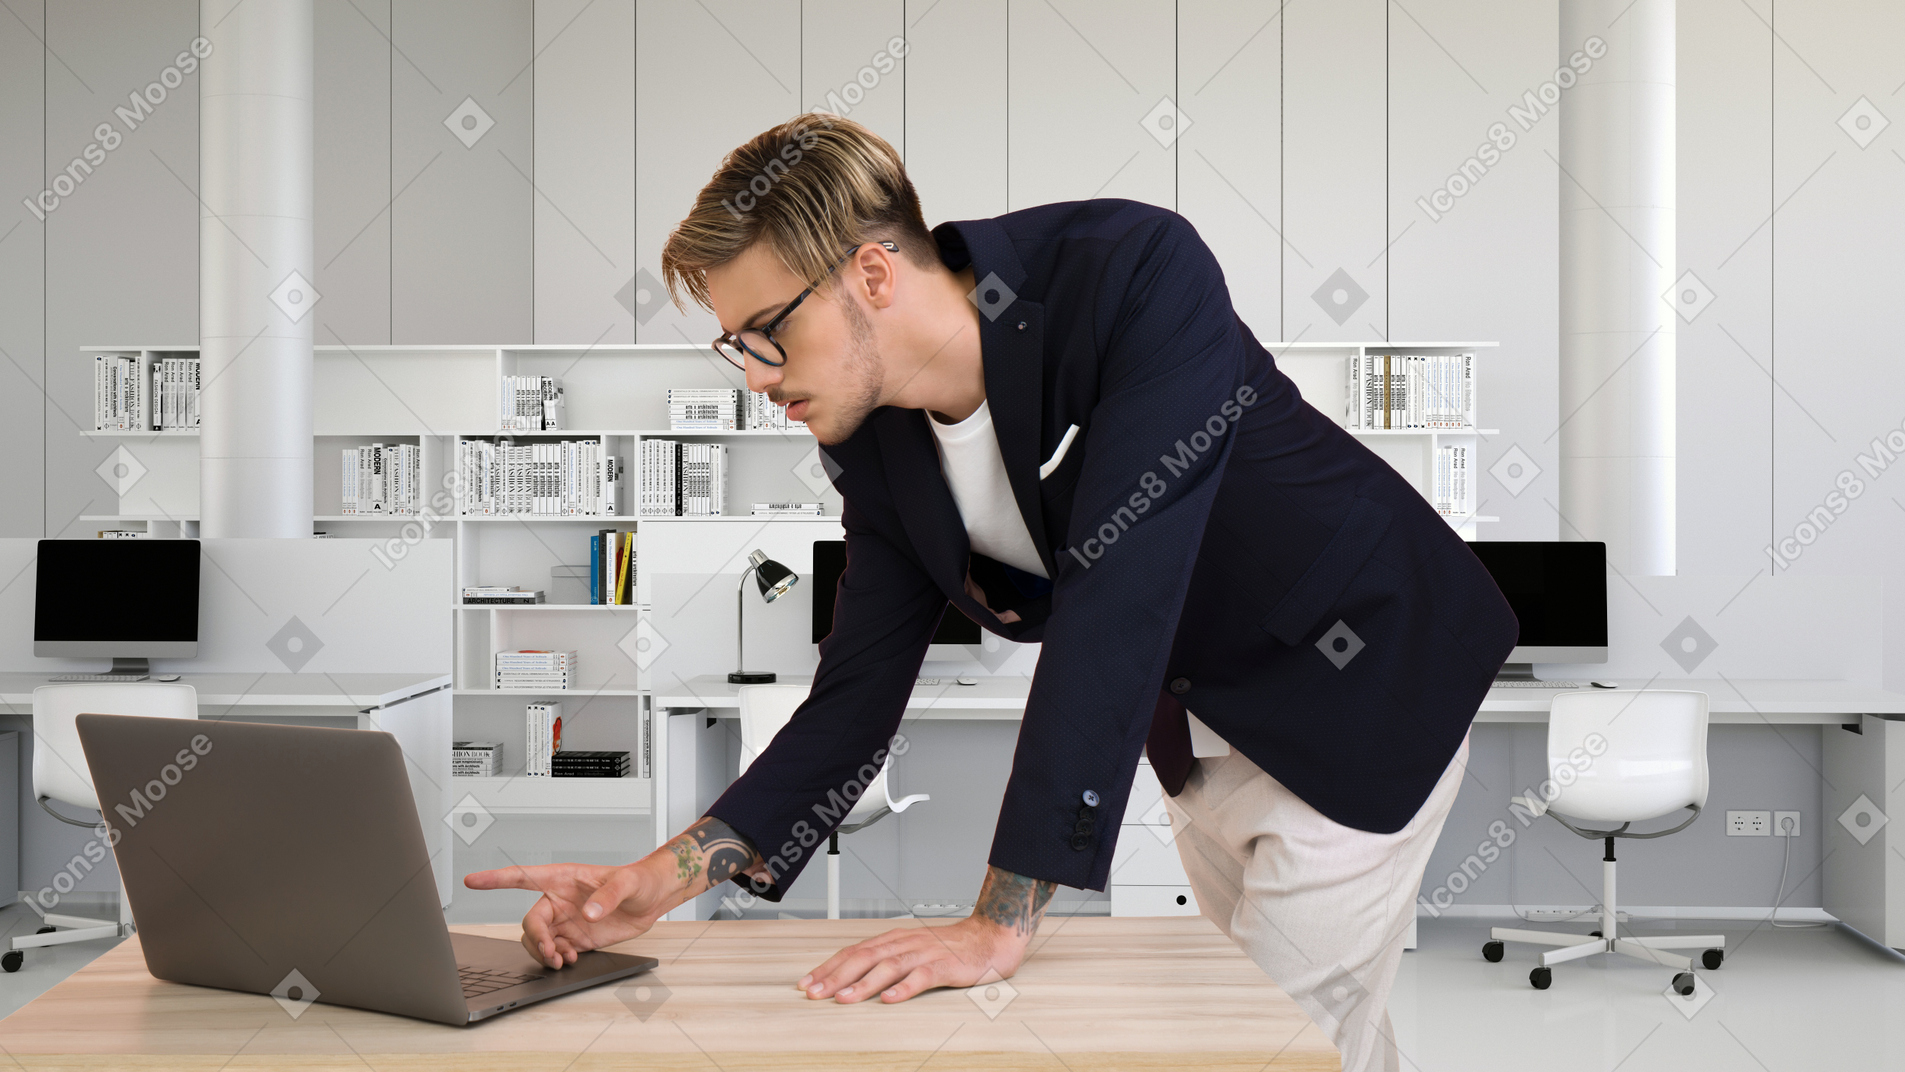 A businessman leaning over a desk and using a laptop